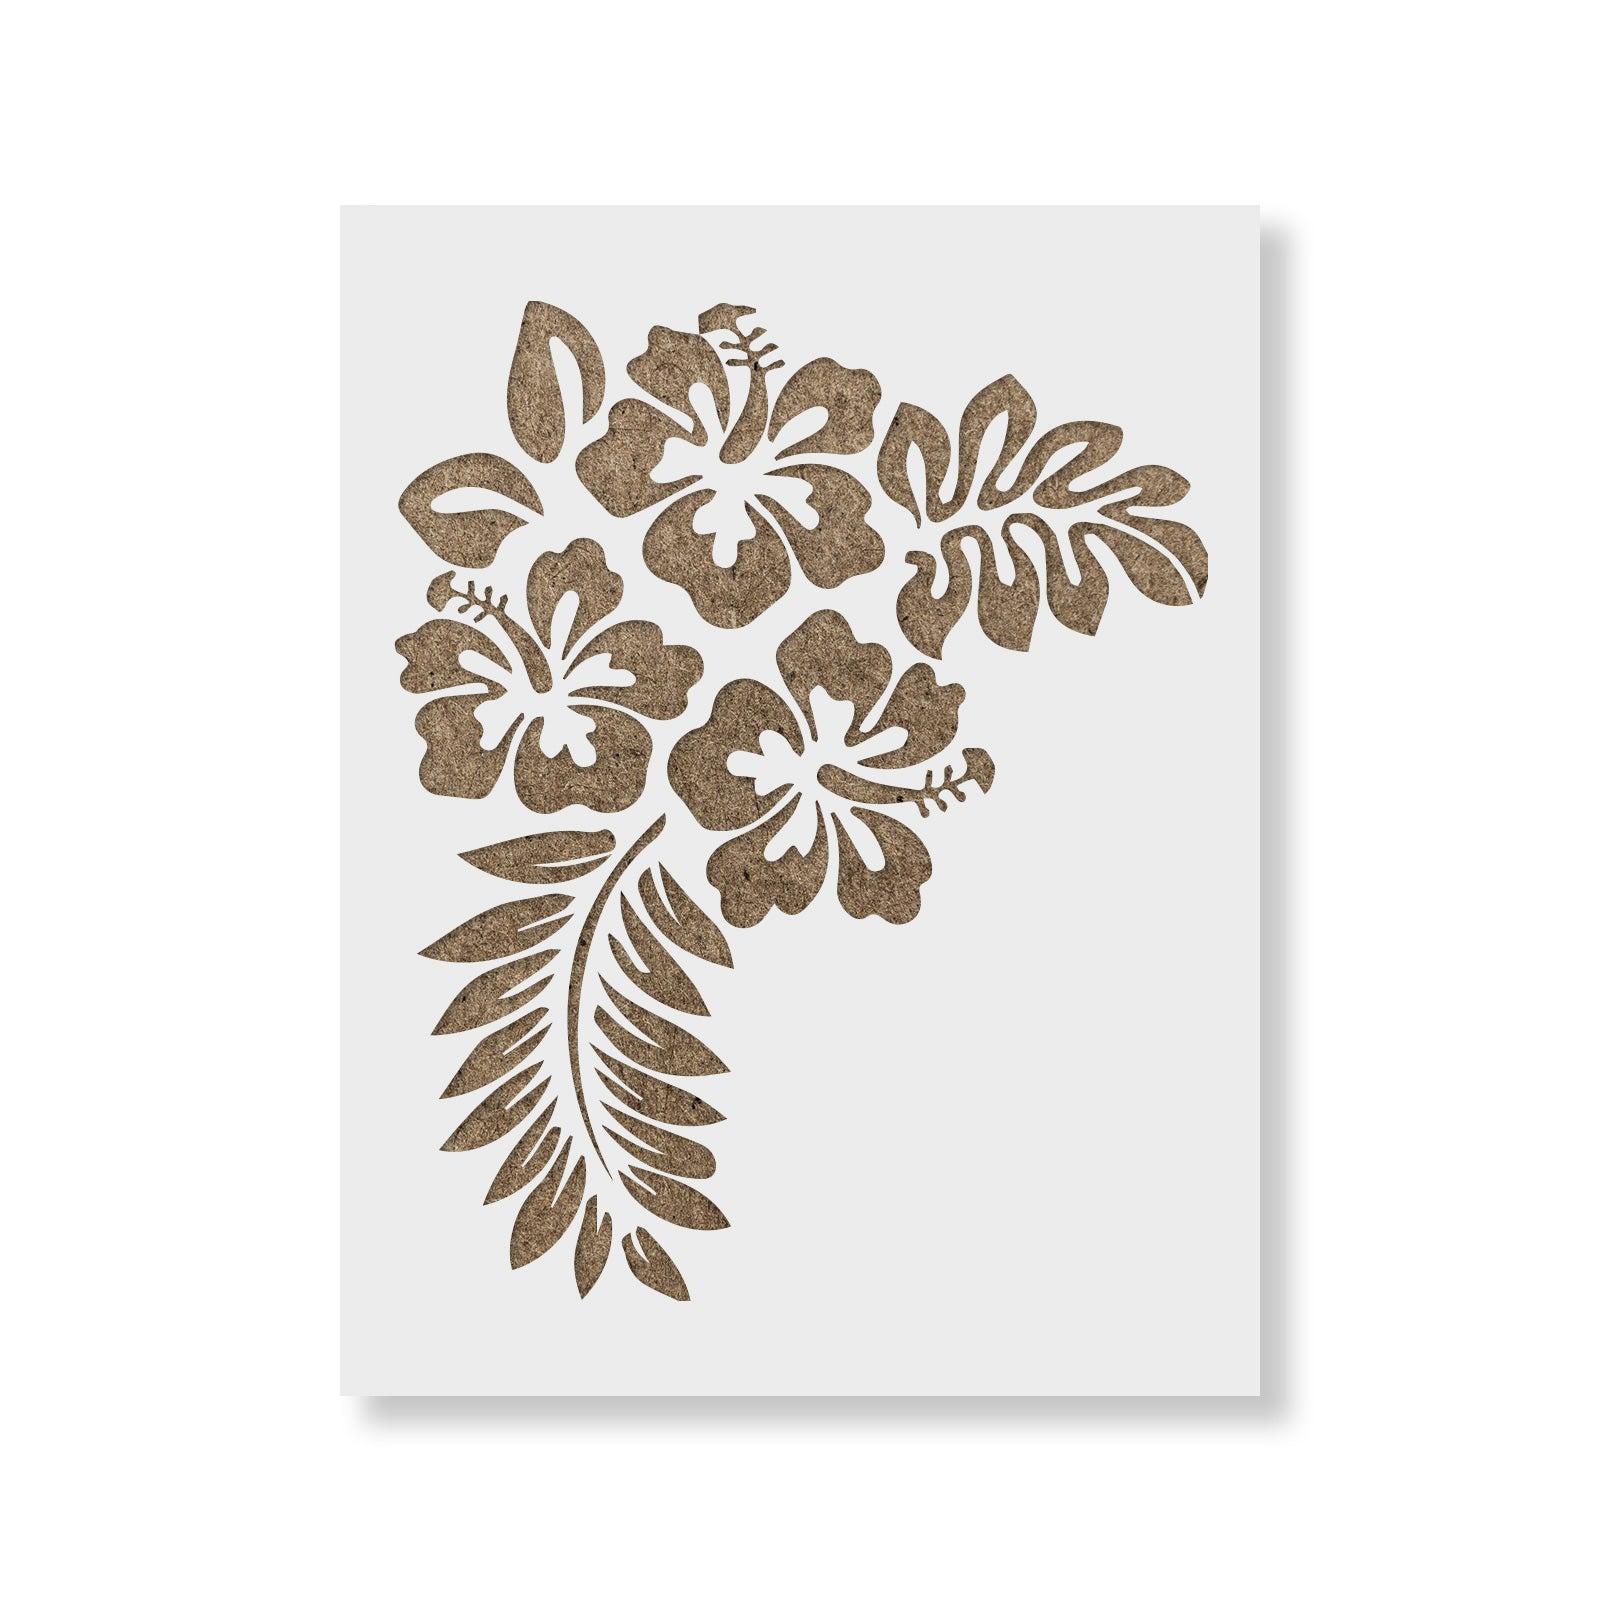 Hibiscus Flower Stencil, Large and small size Hibiscus stencils